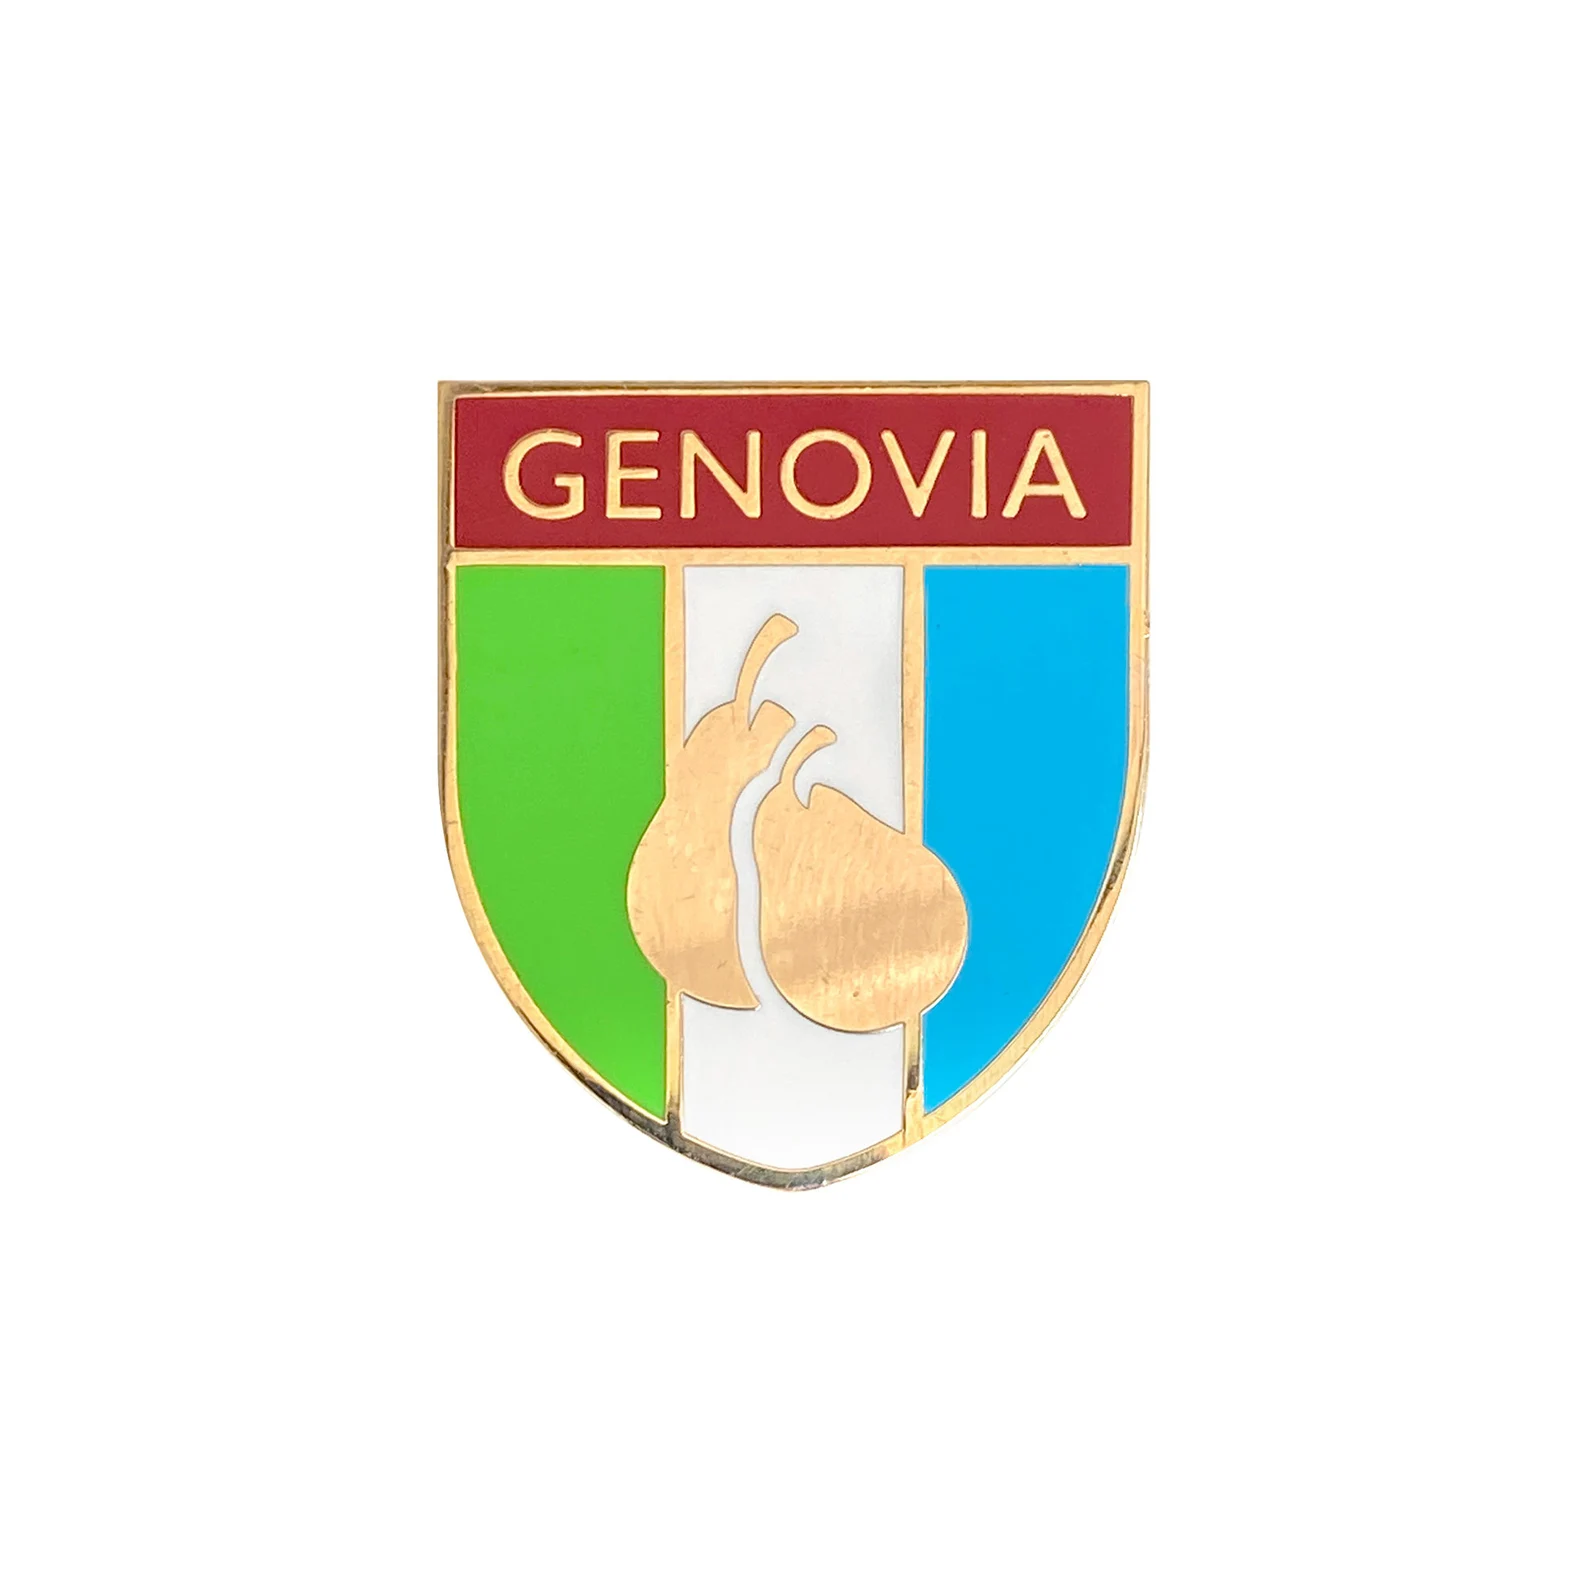 An email pin in the shape of the Genovia flag with gold pears on it